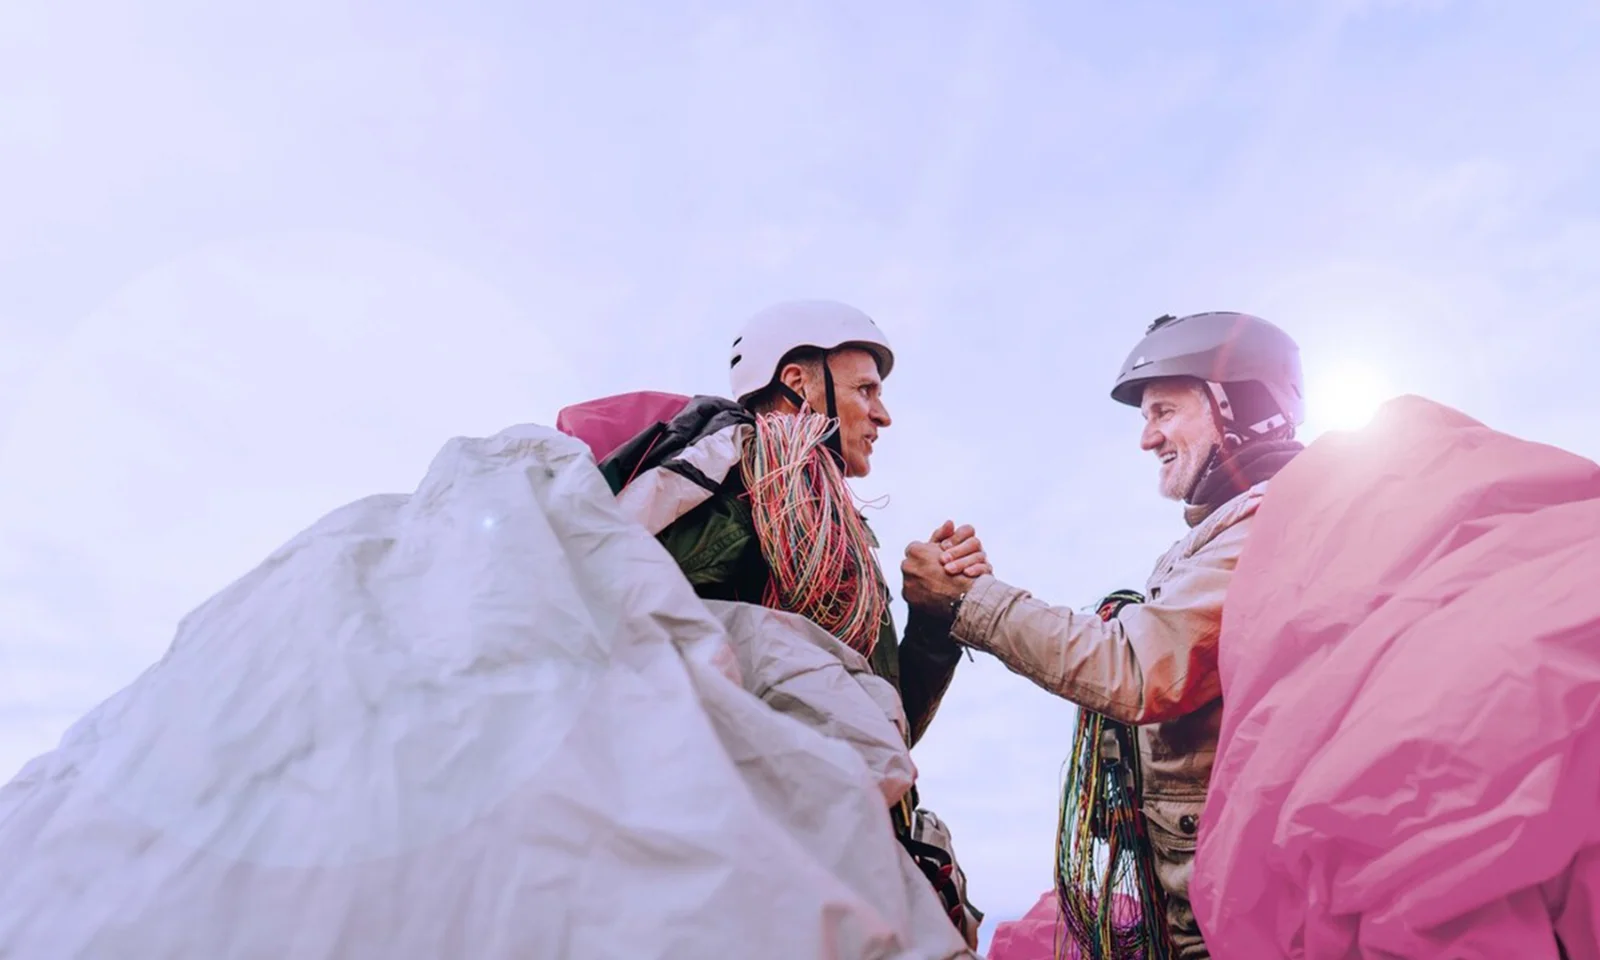 This image showcases two paragliders, moments before their takeoff, shaking hands in a gesture of camaraderie and mutual trust. Both are geared up with helmets and harnesses, their colourful parachutes draped around them, adding vibrant hues to the scene. The sky above is clear, symbolizing perfect conditions for their adventure. The image captures the essence of adventure sports—preparation, trust, and shared excitement. The mutual handshake highlights the bond and confidence between the two individuals, underscoring the human element in extreme sports.